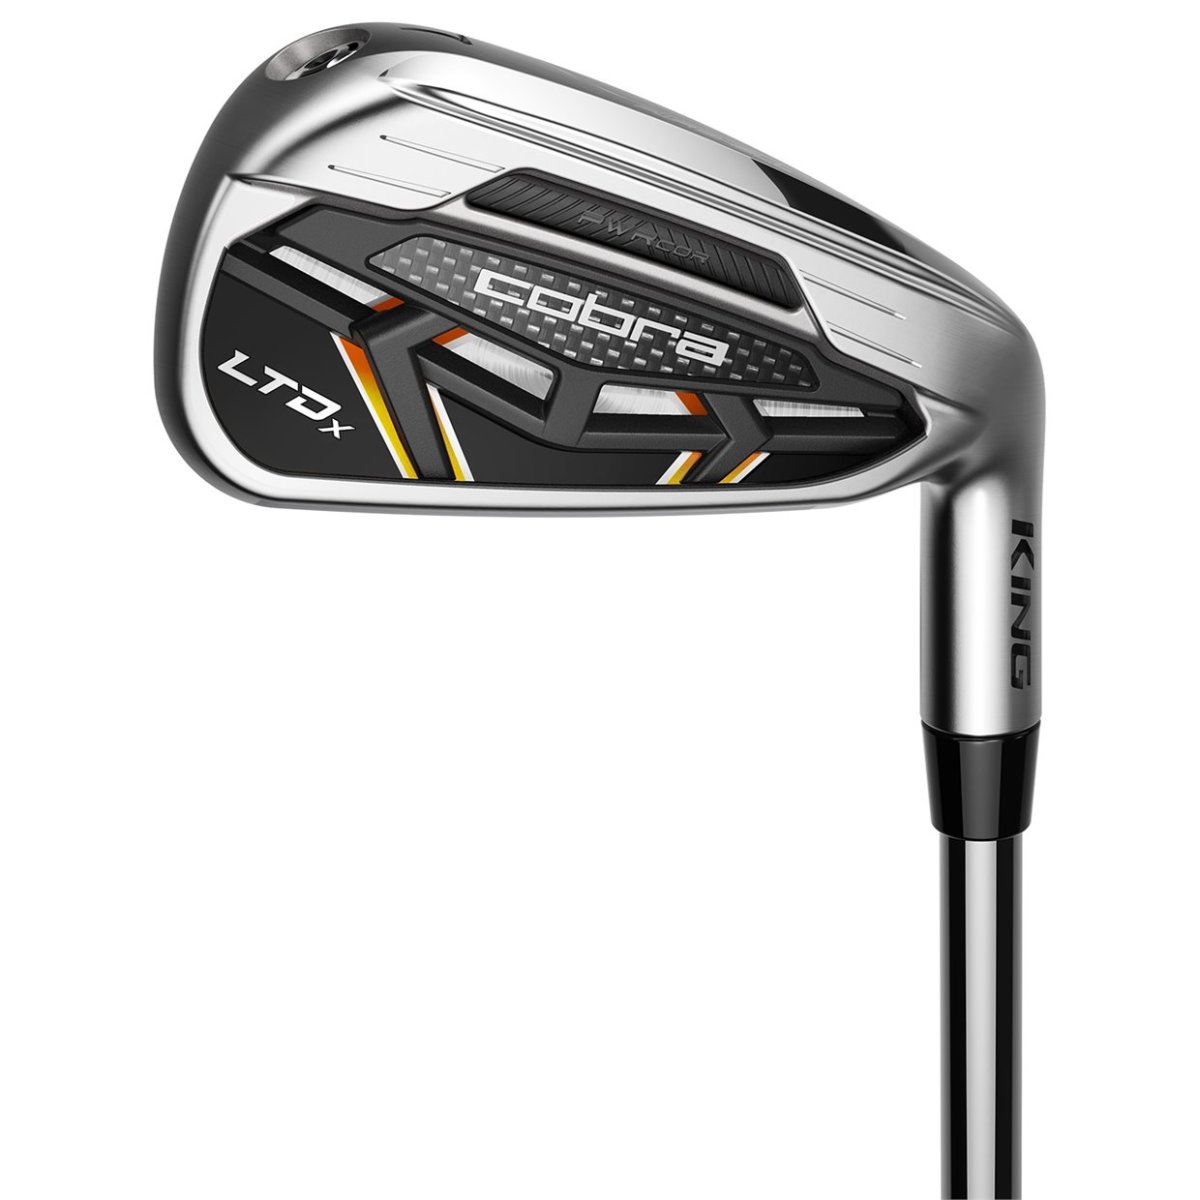 Shop Cobra LTDx irons on Morning Read's online pro shop, powered by GlobalGolf.